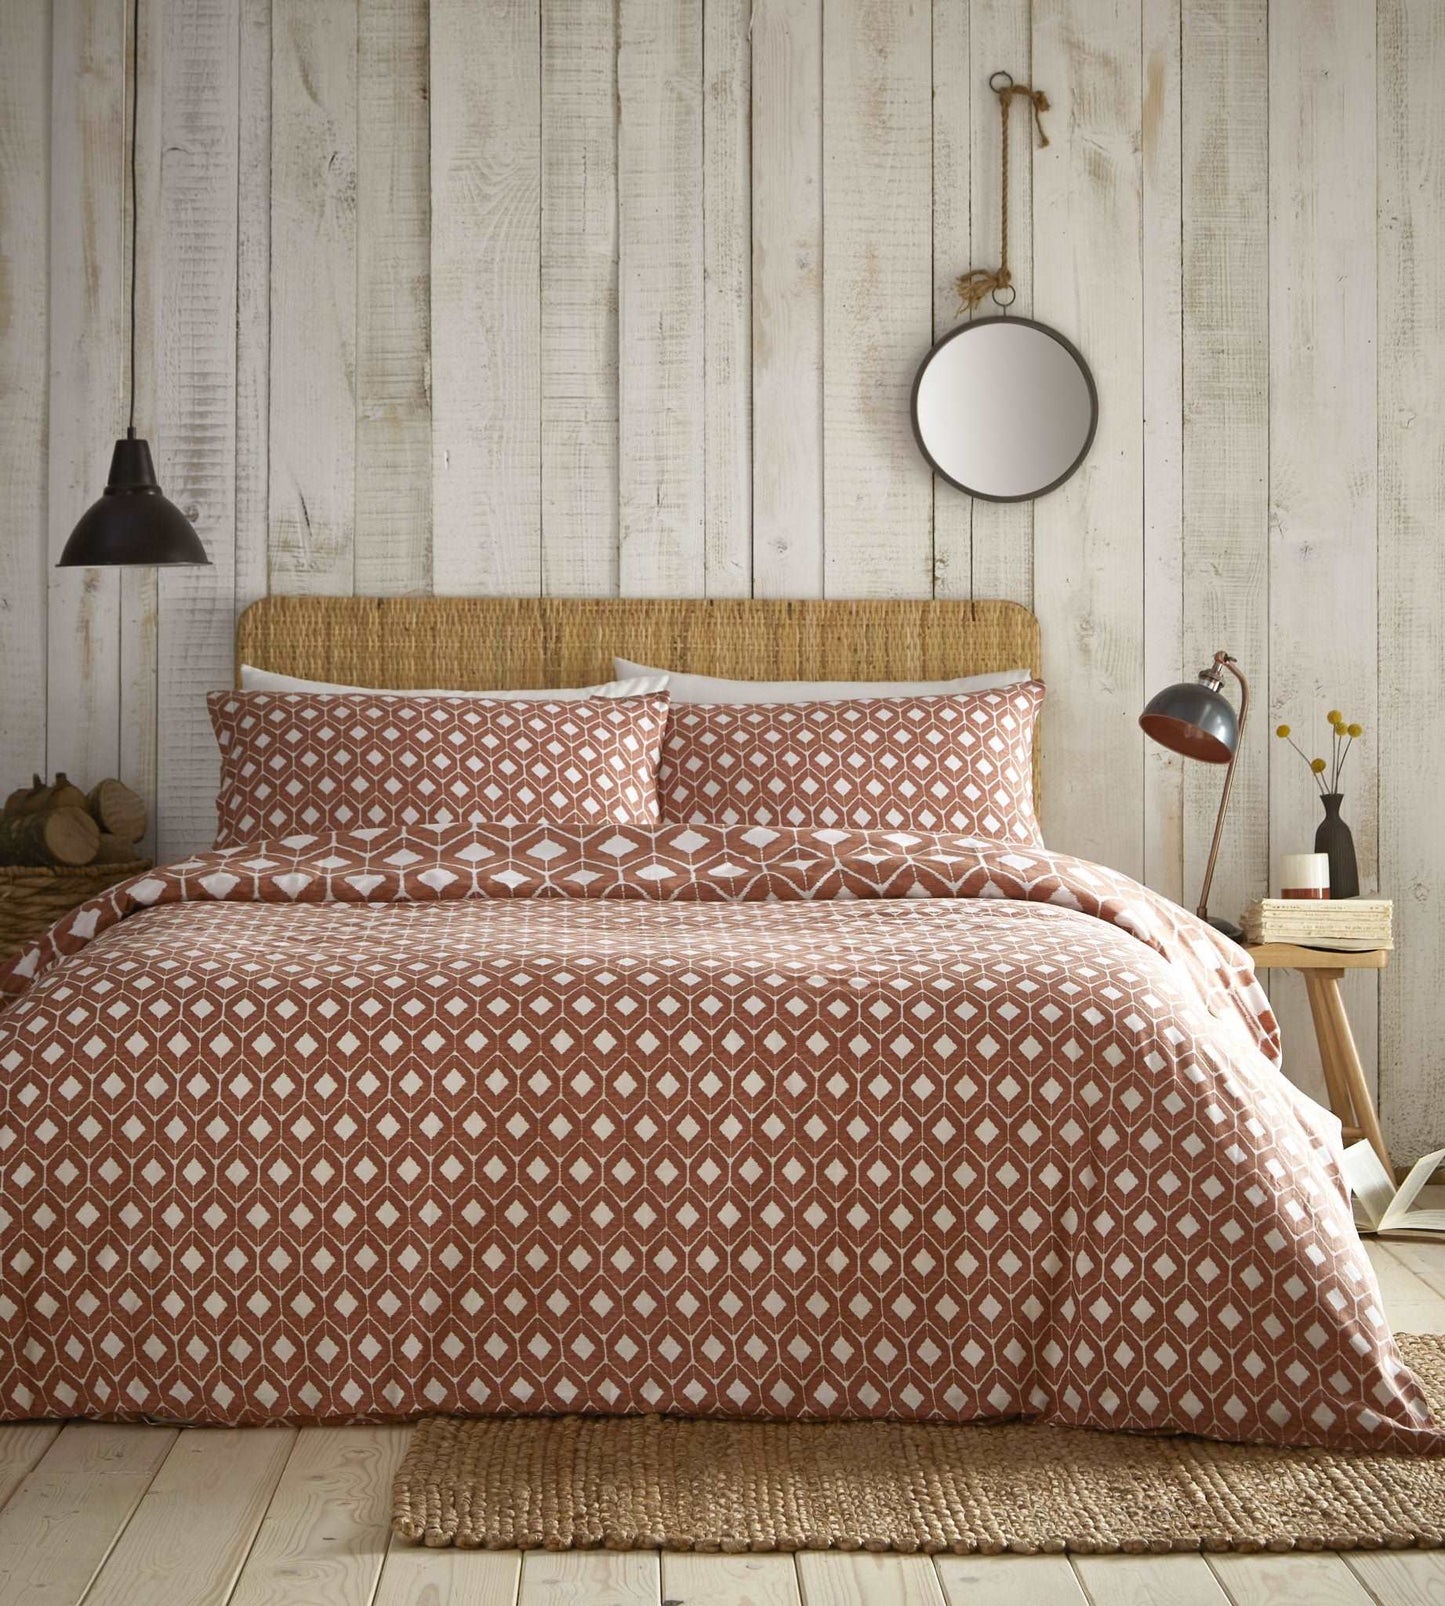 a warm and homely ethnic geometric print, inspired by tribal and native shapes and patterns